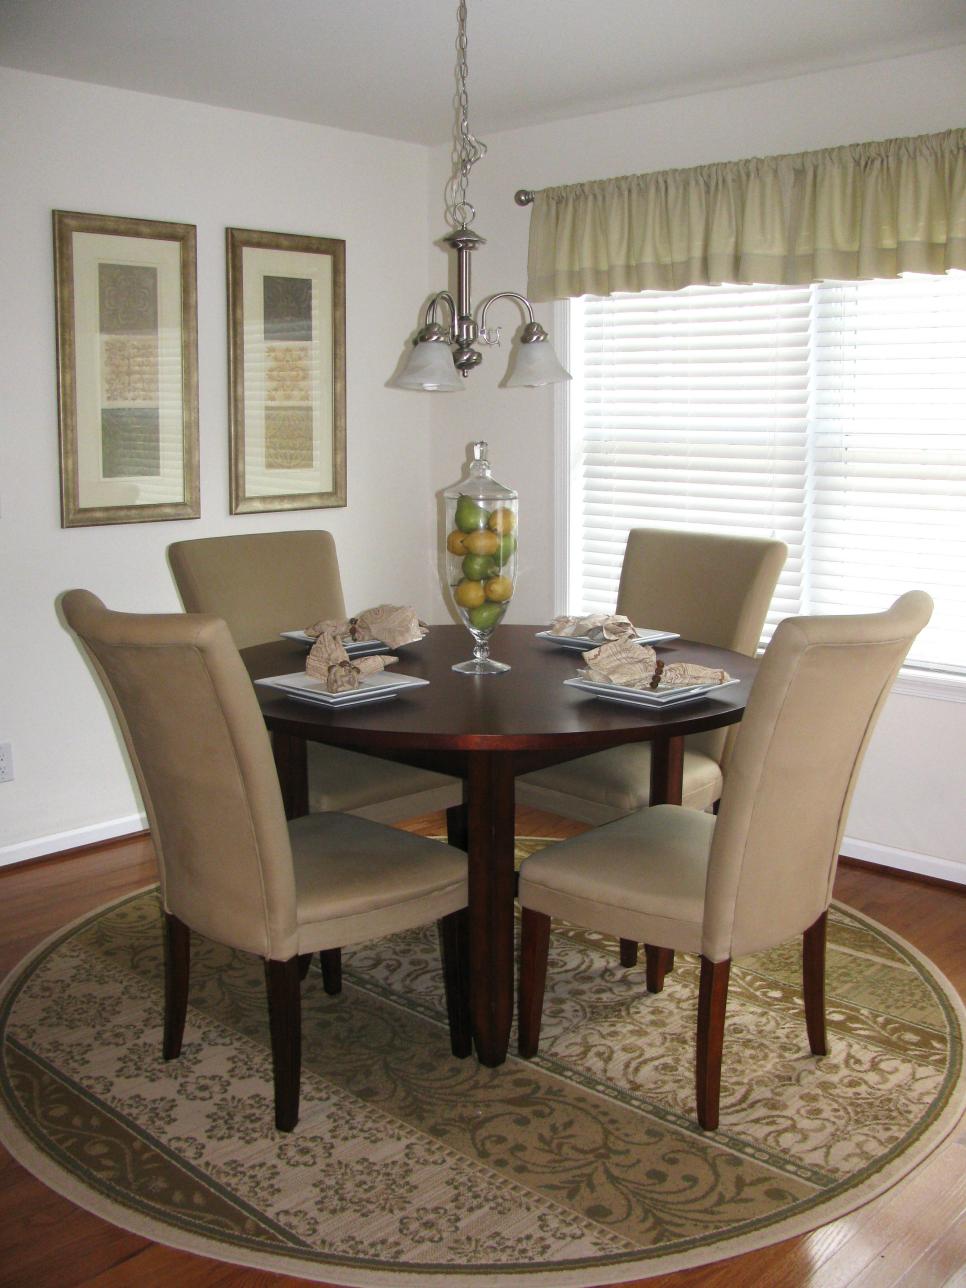 Neutral Transitional Dining Room With, Dining Room Rug For Round Table